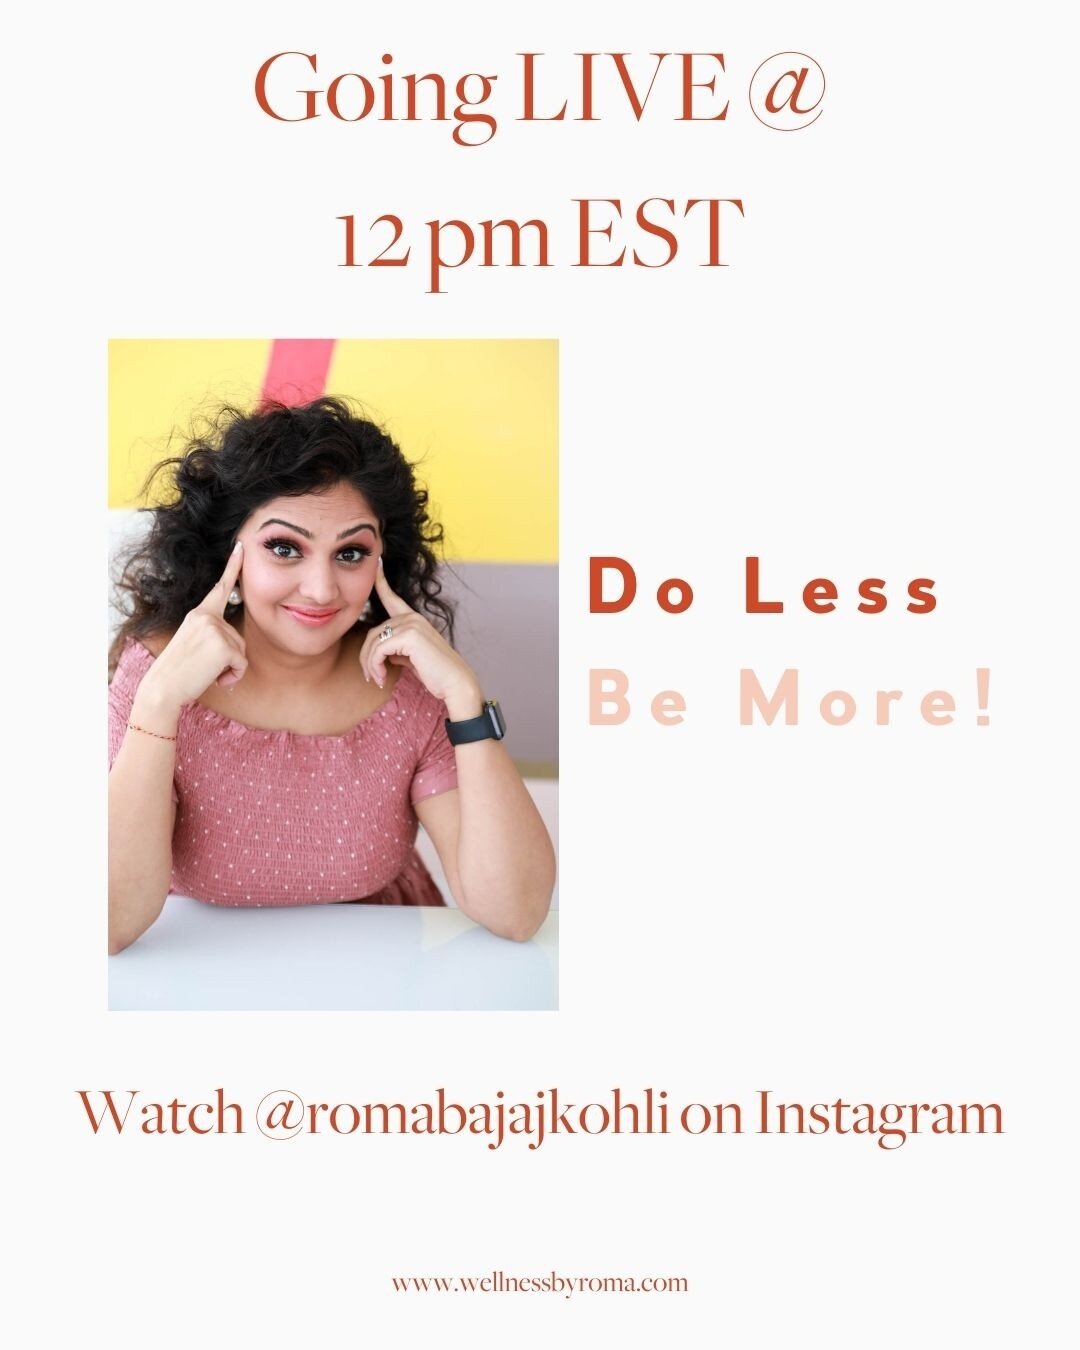 Hope you can make it today!! 

I am excited to share my secrets to doing LESS and being MORE
.
.
.
.
.
#wellnessbyroma #positivelifestyle #motivateyourself #liveyourbestlife  #domoreofwhatmakesyouhappy #selfempowerment #selfcareeveryday #beboldbeyou 